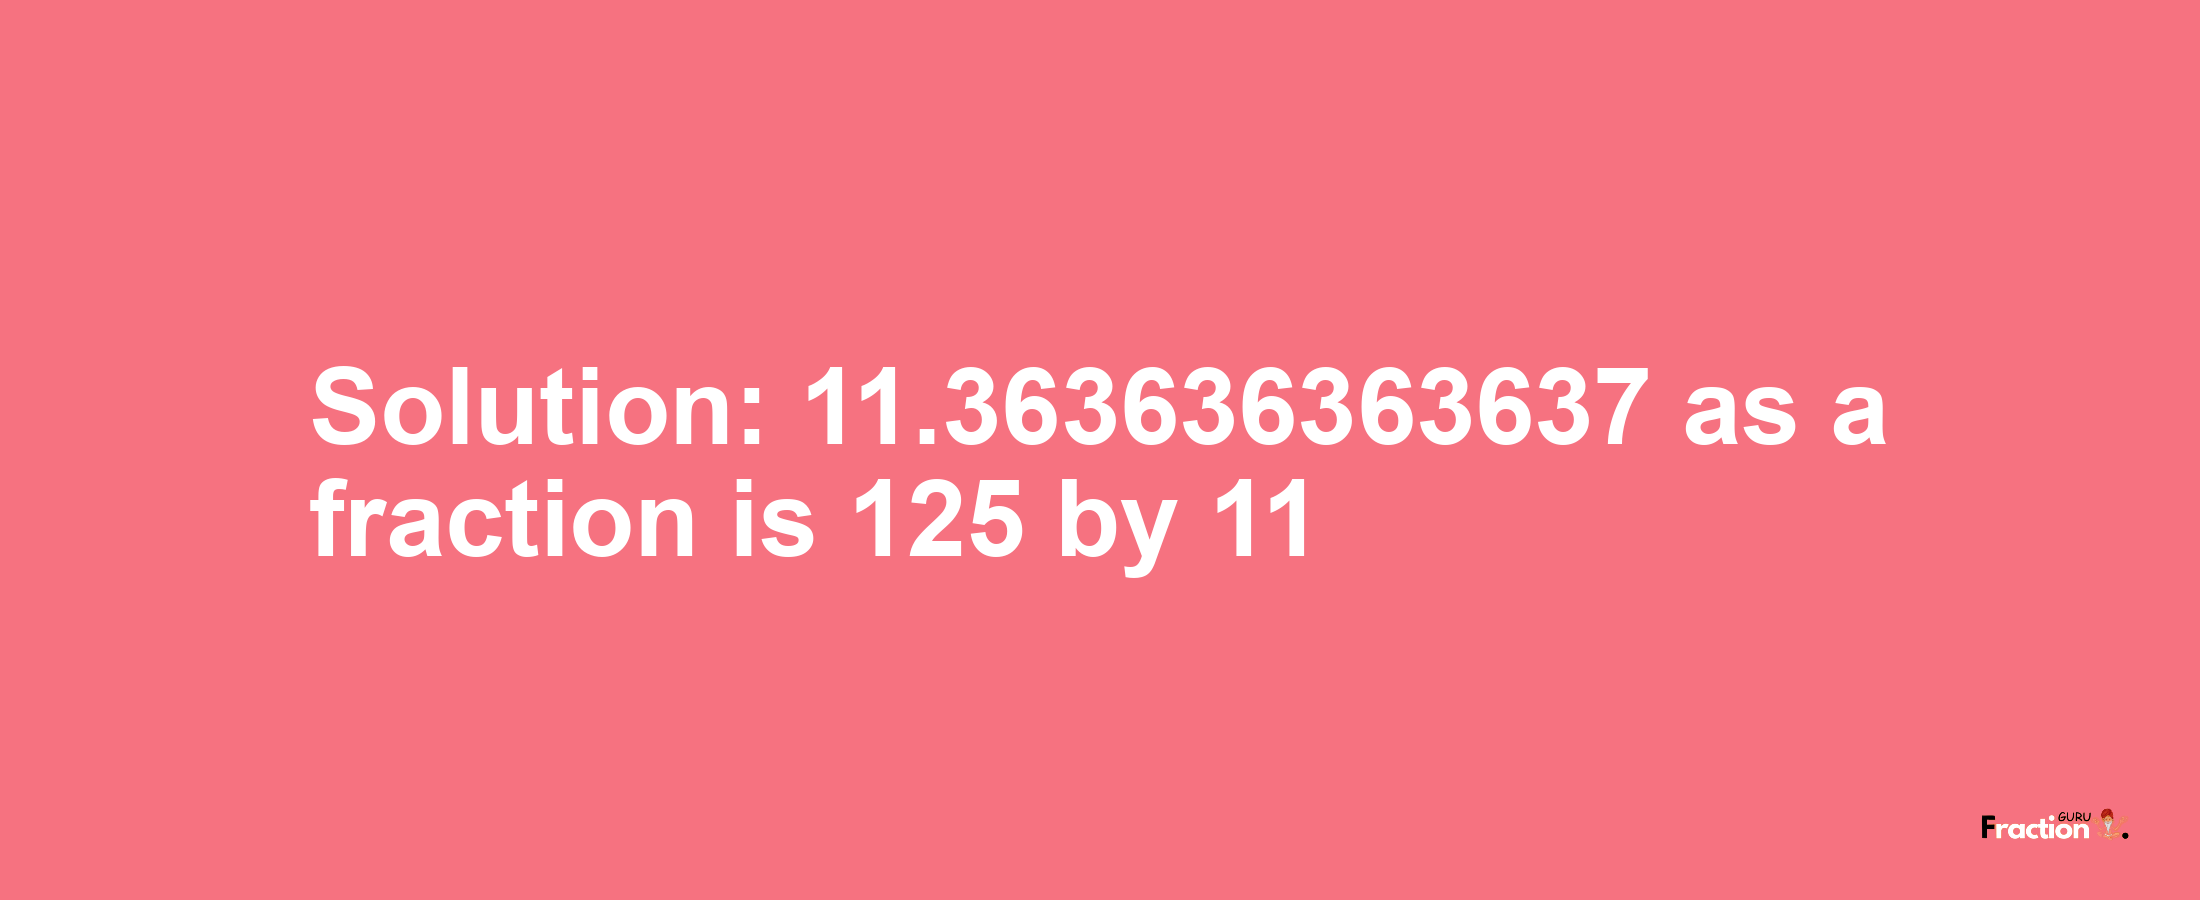 Solution:11.363636363637 as a fraction is 125/11